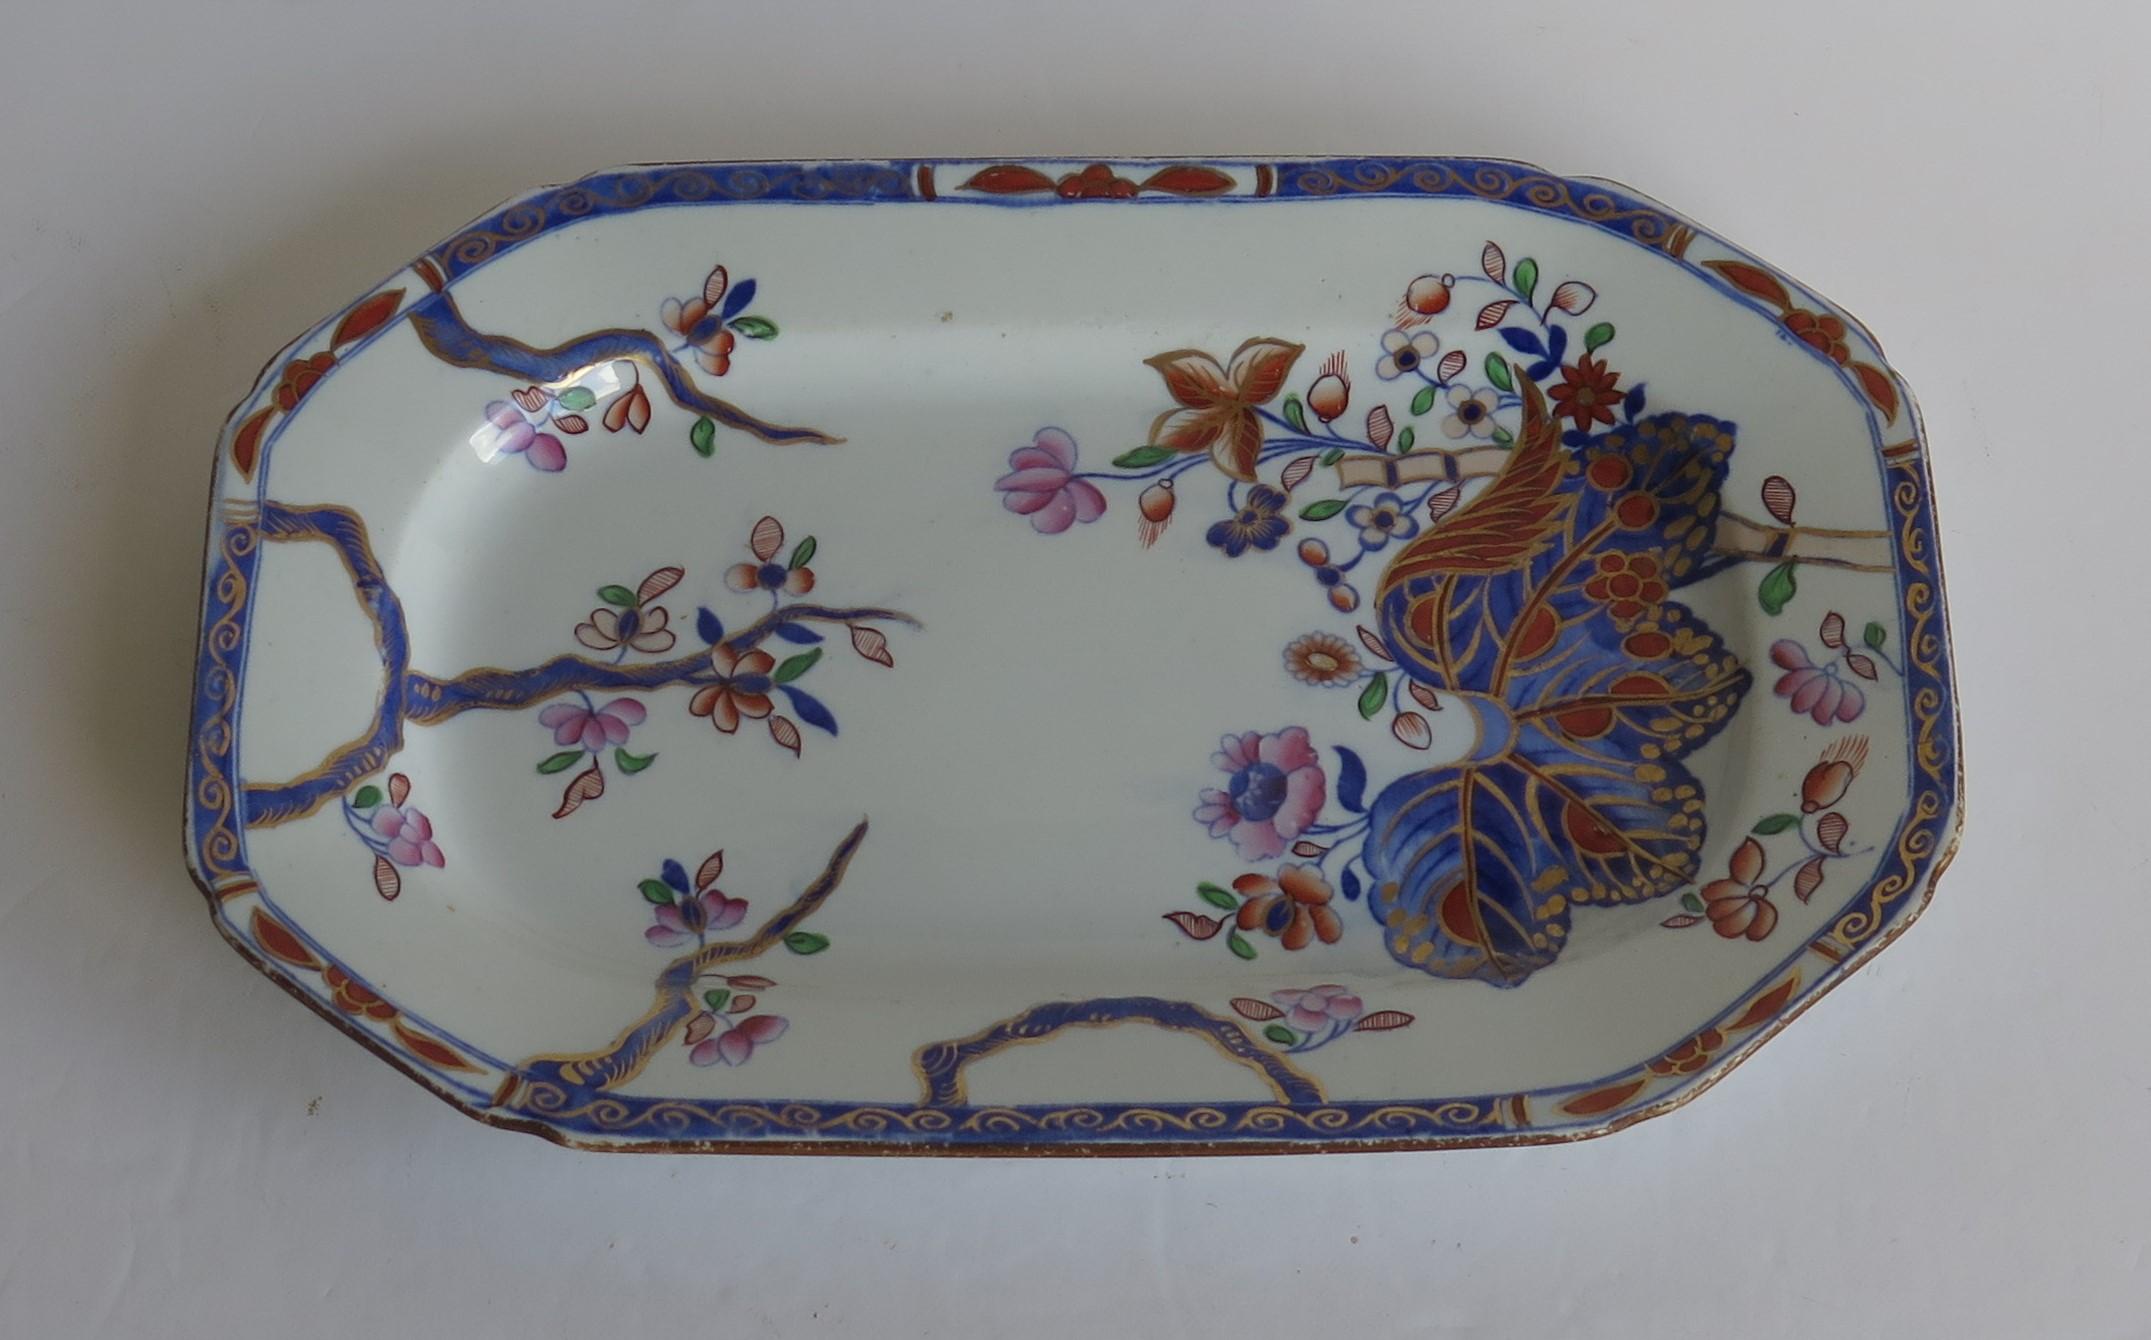 This is a beautiful platter, produced by the Spode factory in the distinctive Tobacco Leaf pattern.

This is pattern number 2061, named the 'Tobacco Leaf' pattern. The chinoiserie decoration was transfer printed in cobalt blue under-glaze, then